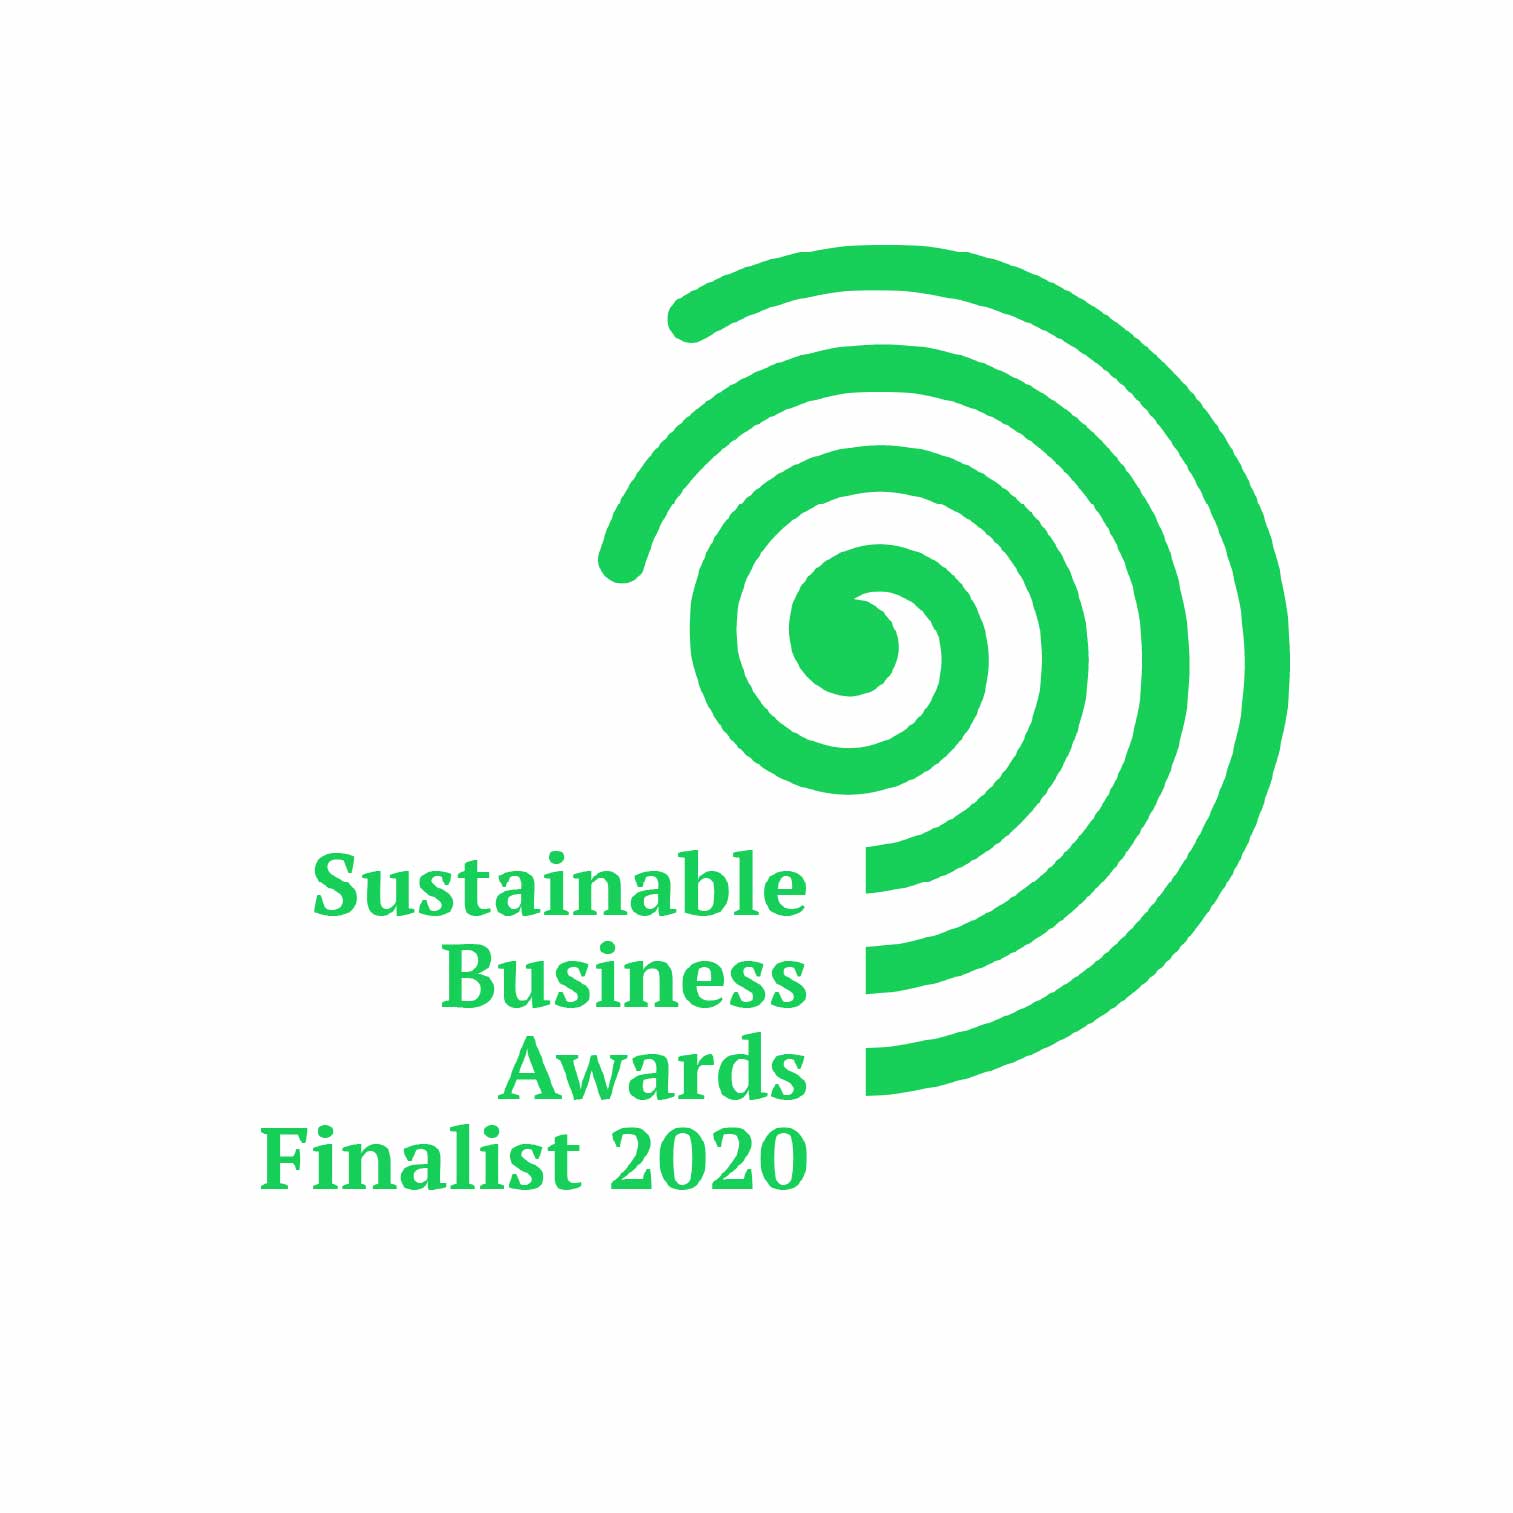 Sustainable Business Awards Finalist